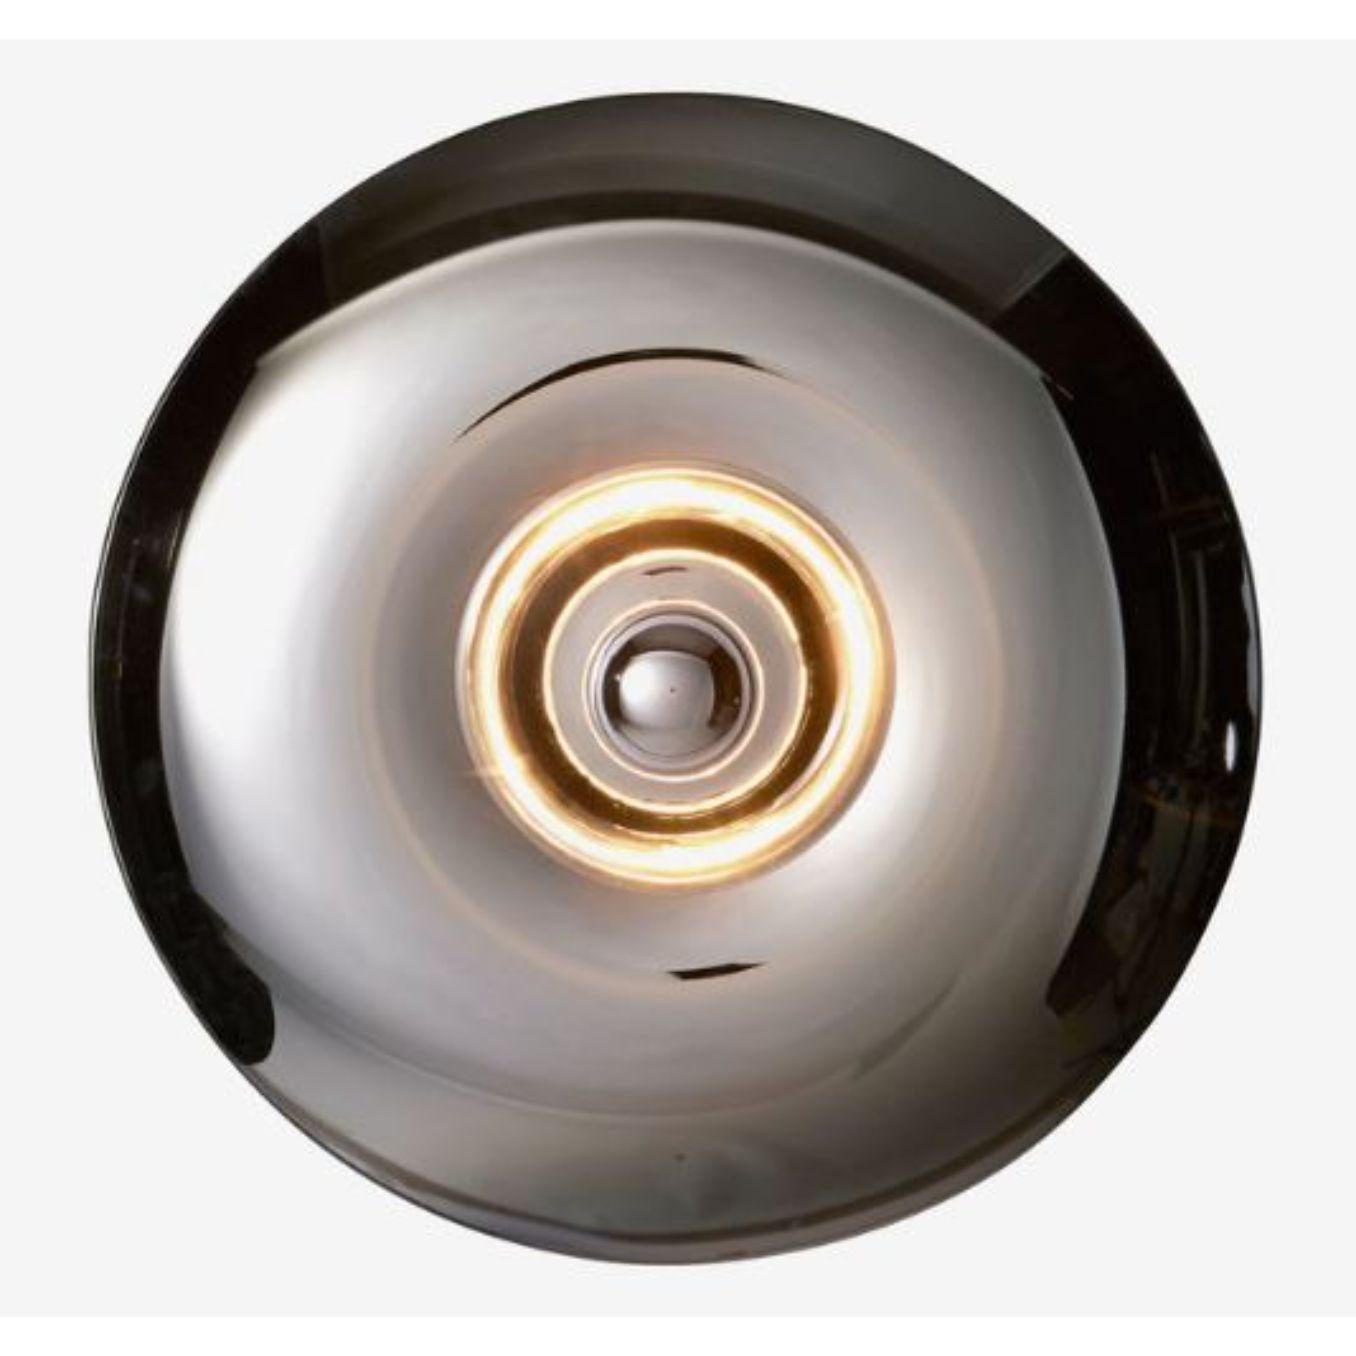 Large Bombato wall light by Radar.
Design: Bastien Taillard.
Materials: Metal, glass. 
Dimensions: W 70 x D 20 x H 70 cm.
Also available in different colors (gold, bronze, Iris) and materials (solid Oak) 

All our lamps can be wired according